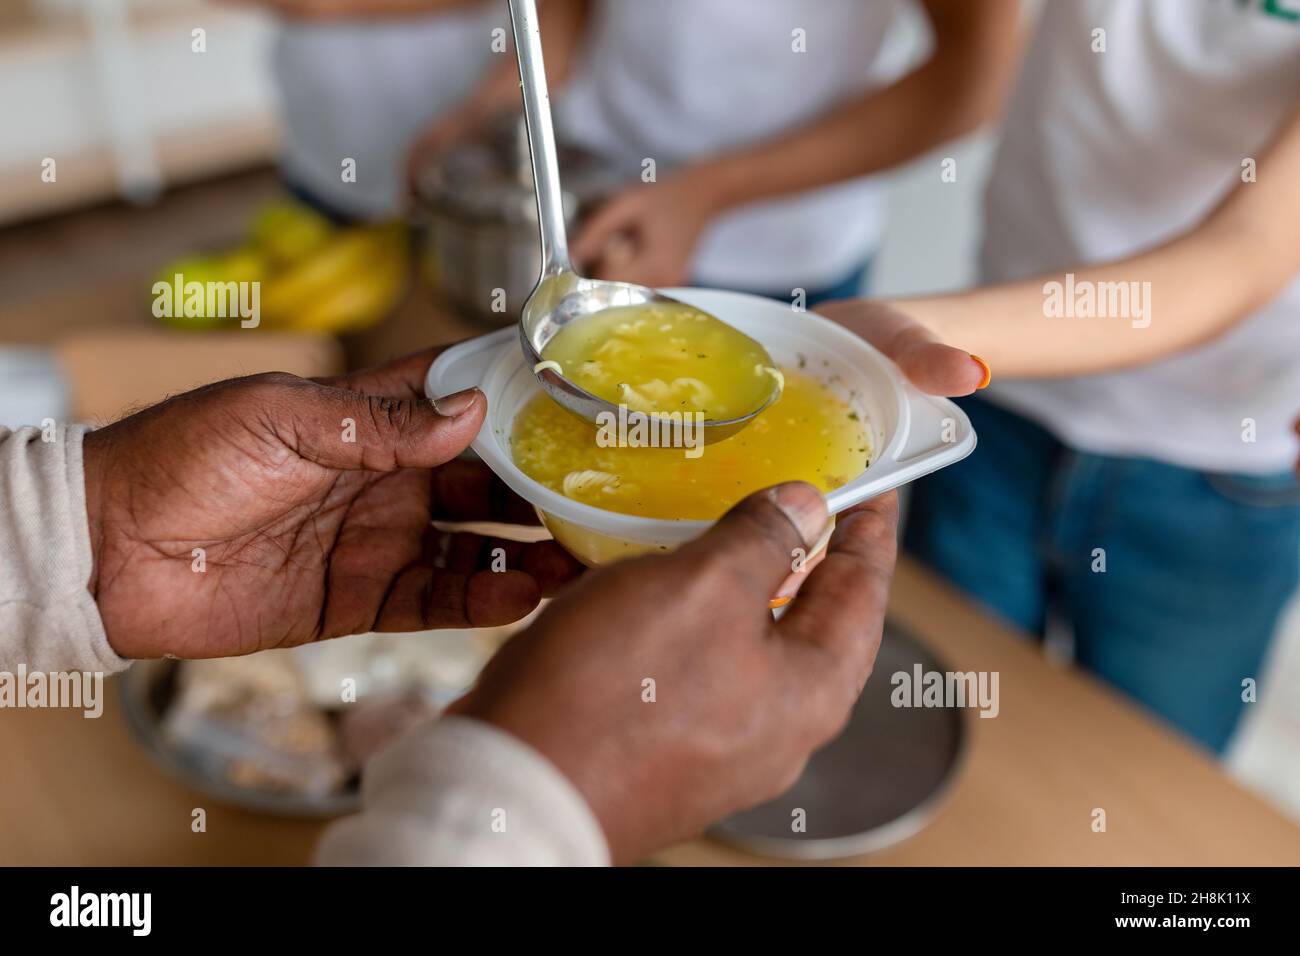 Volunteers help. Young people serving hot soup for homeless in community charity donation center, closeup Stock Photo